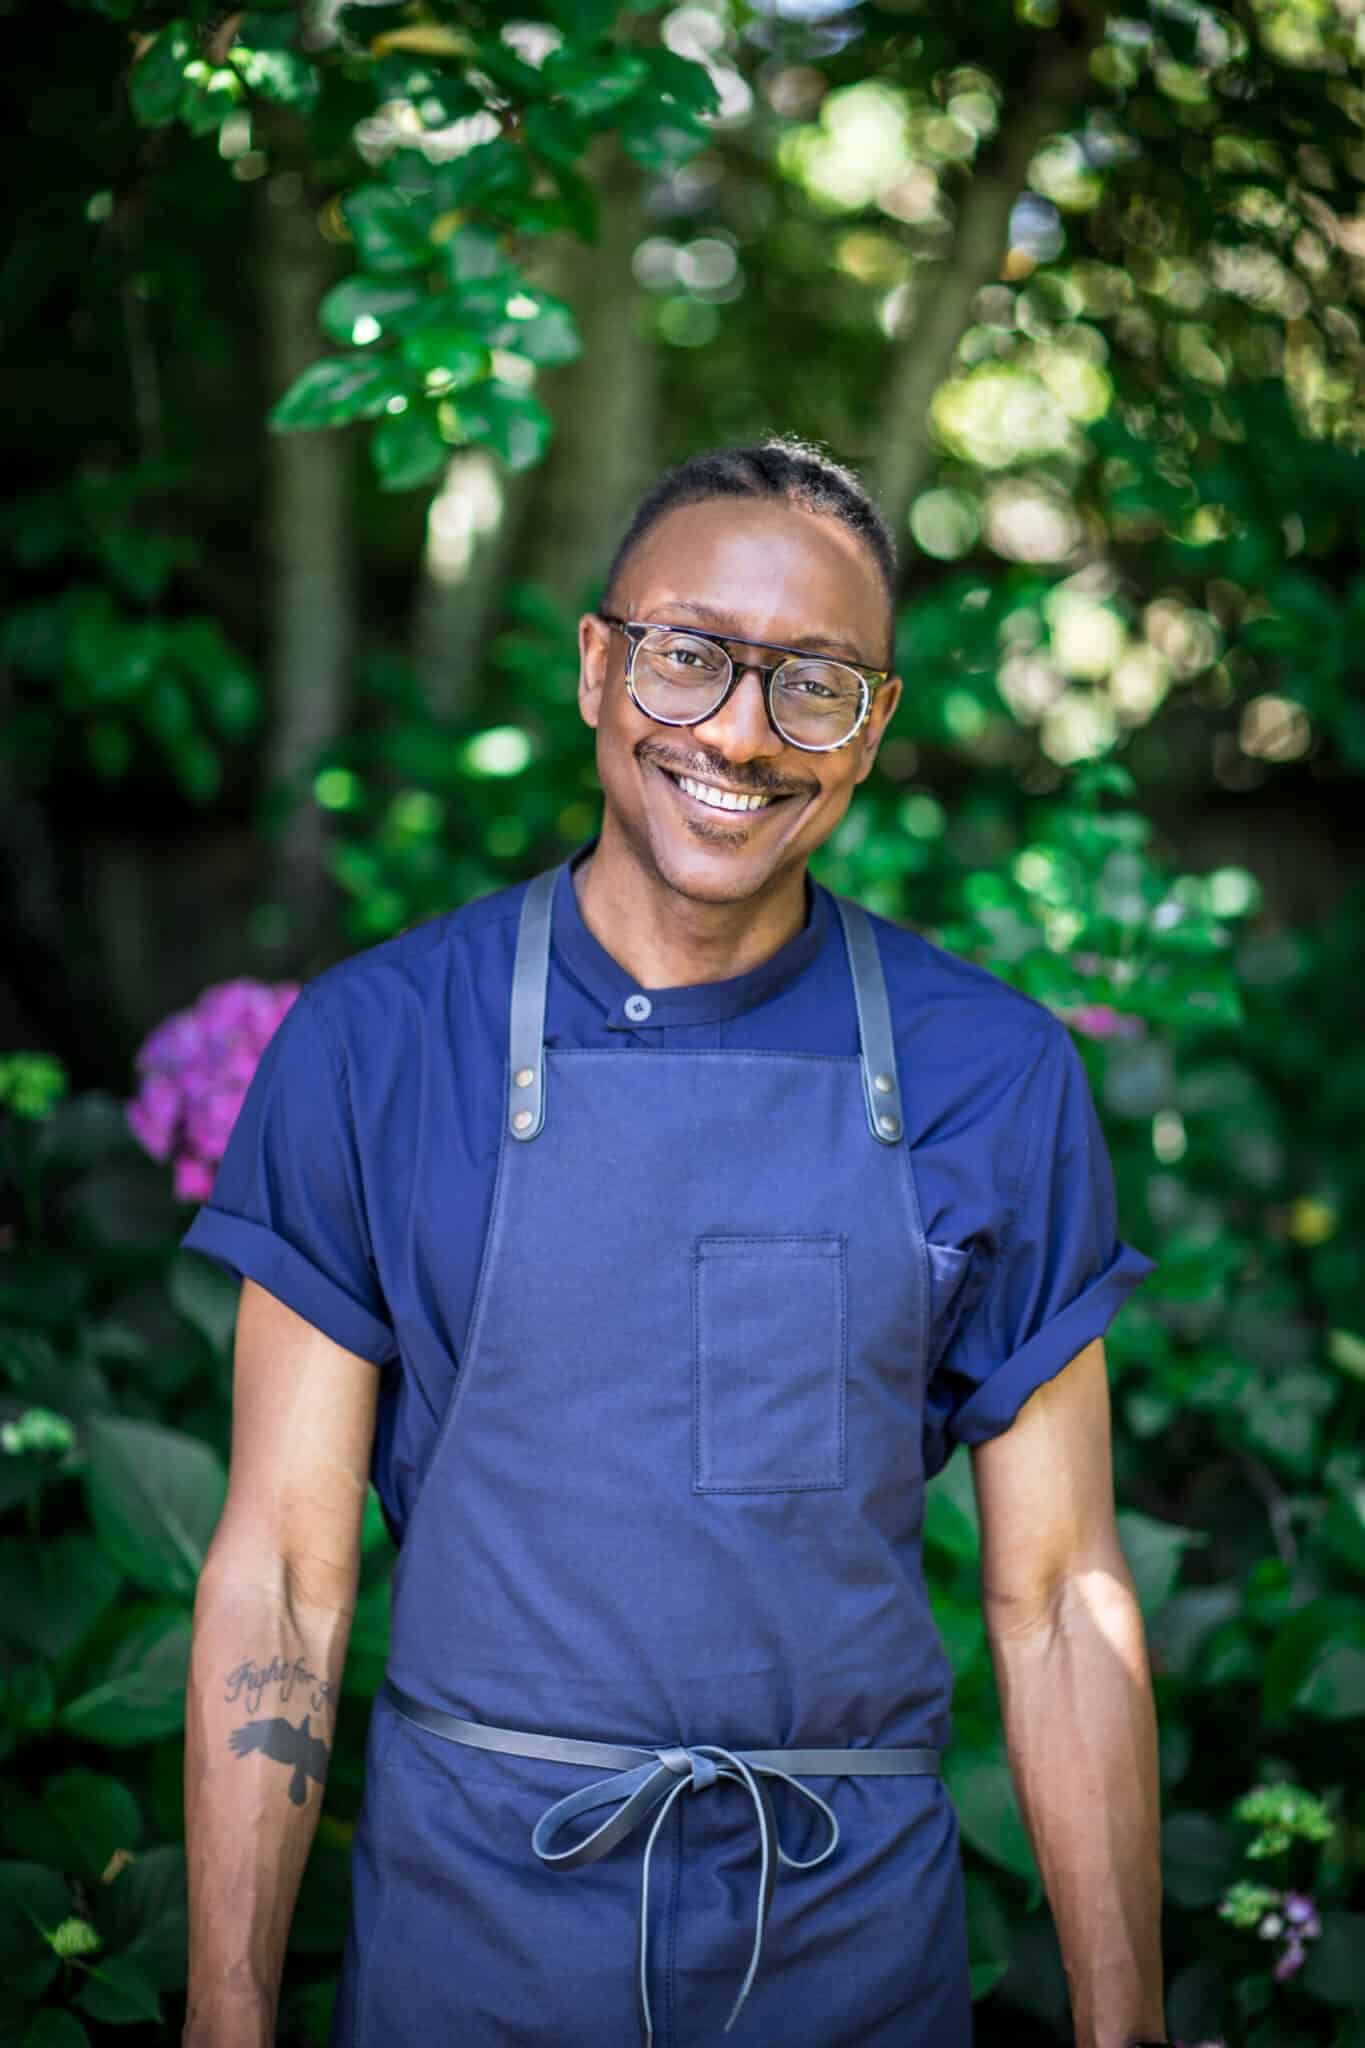 Gregory Gourdet wearing a blue shirt and a navy apron, smiling at the camera.